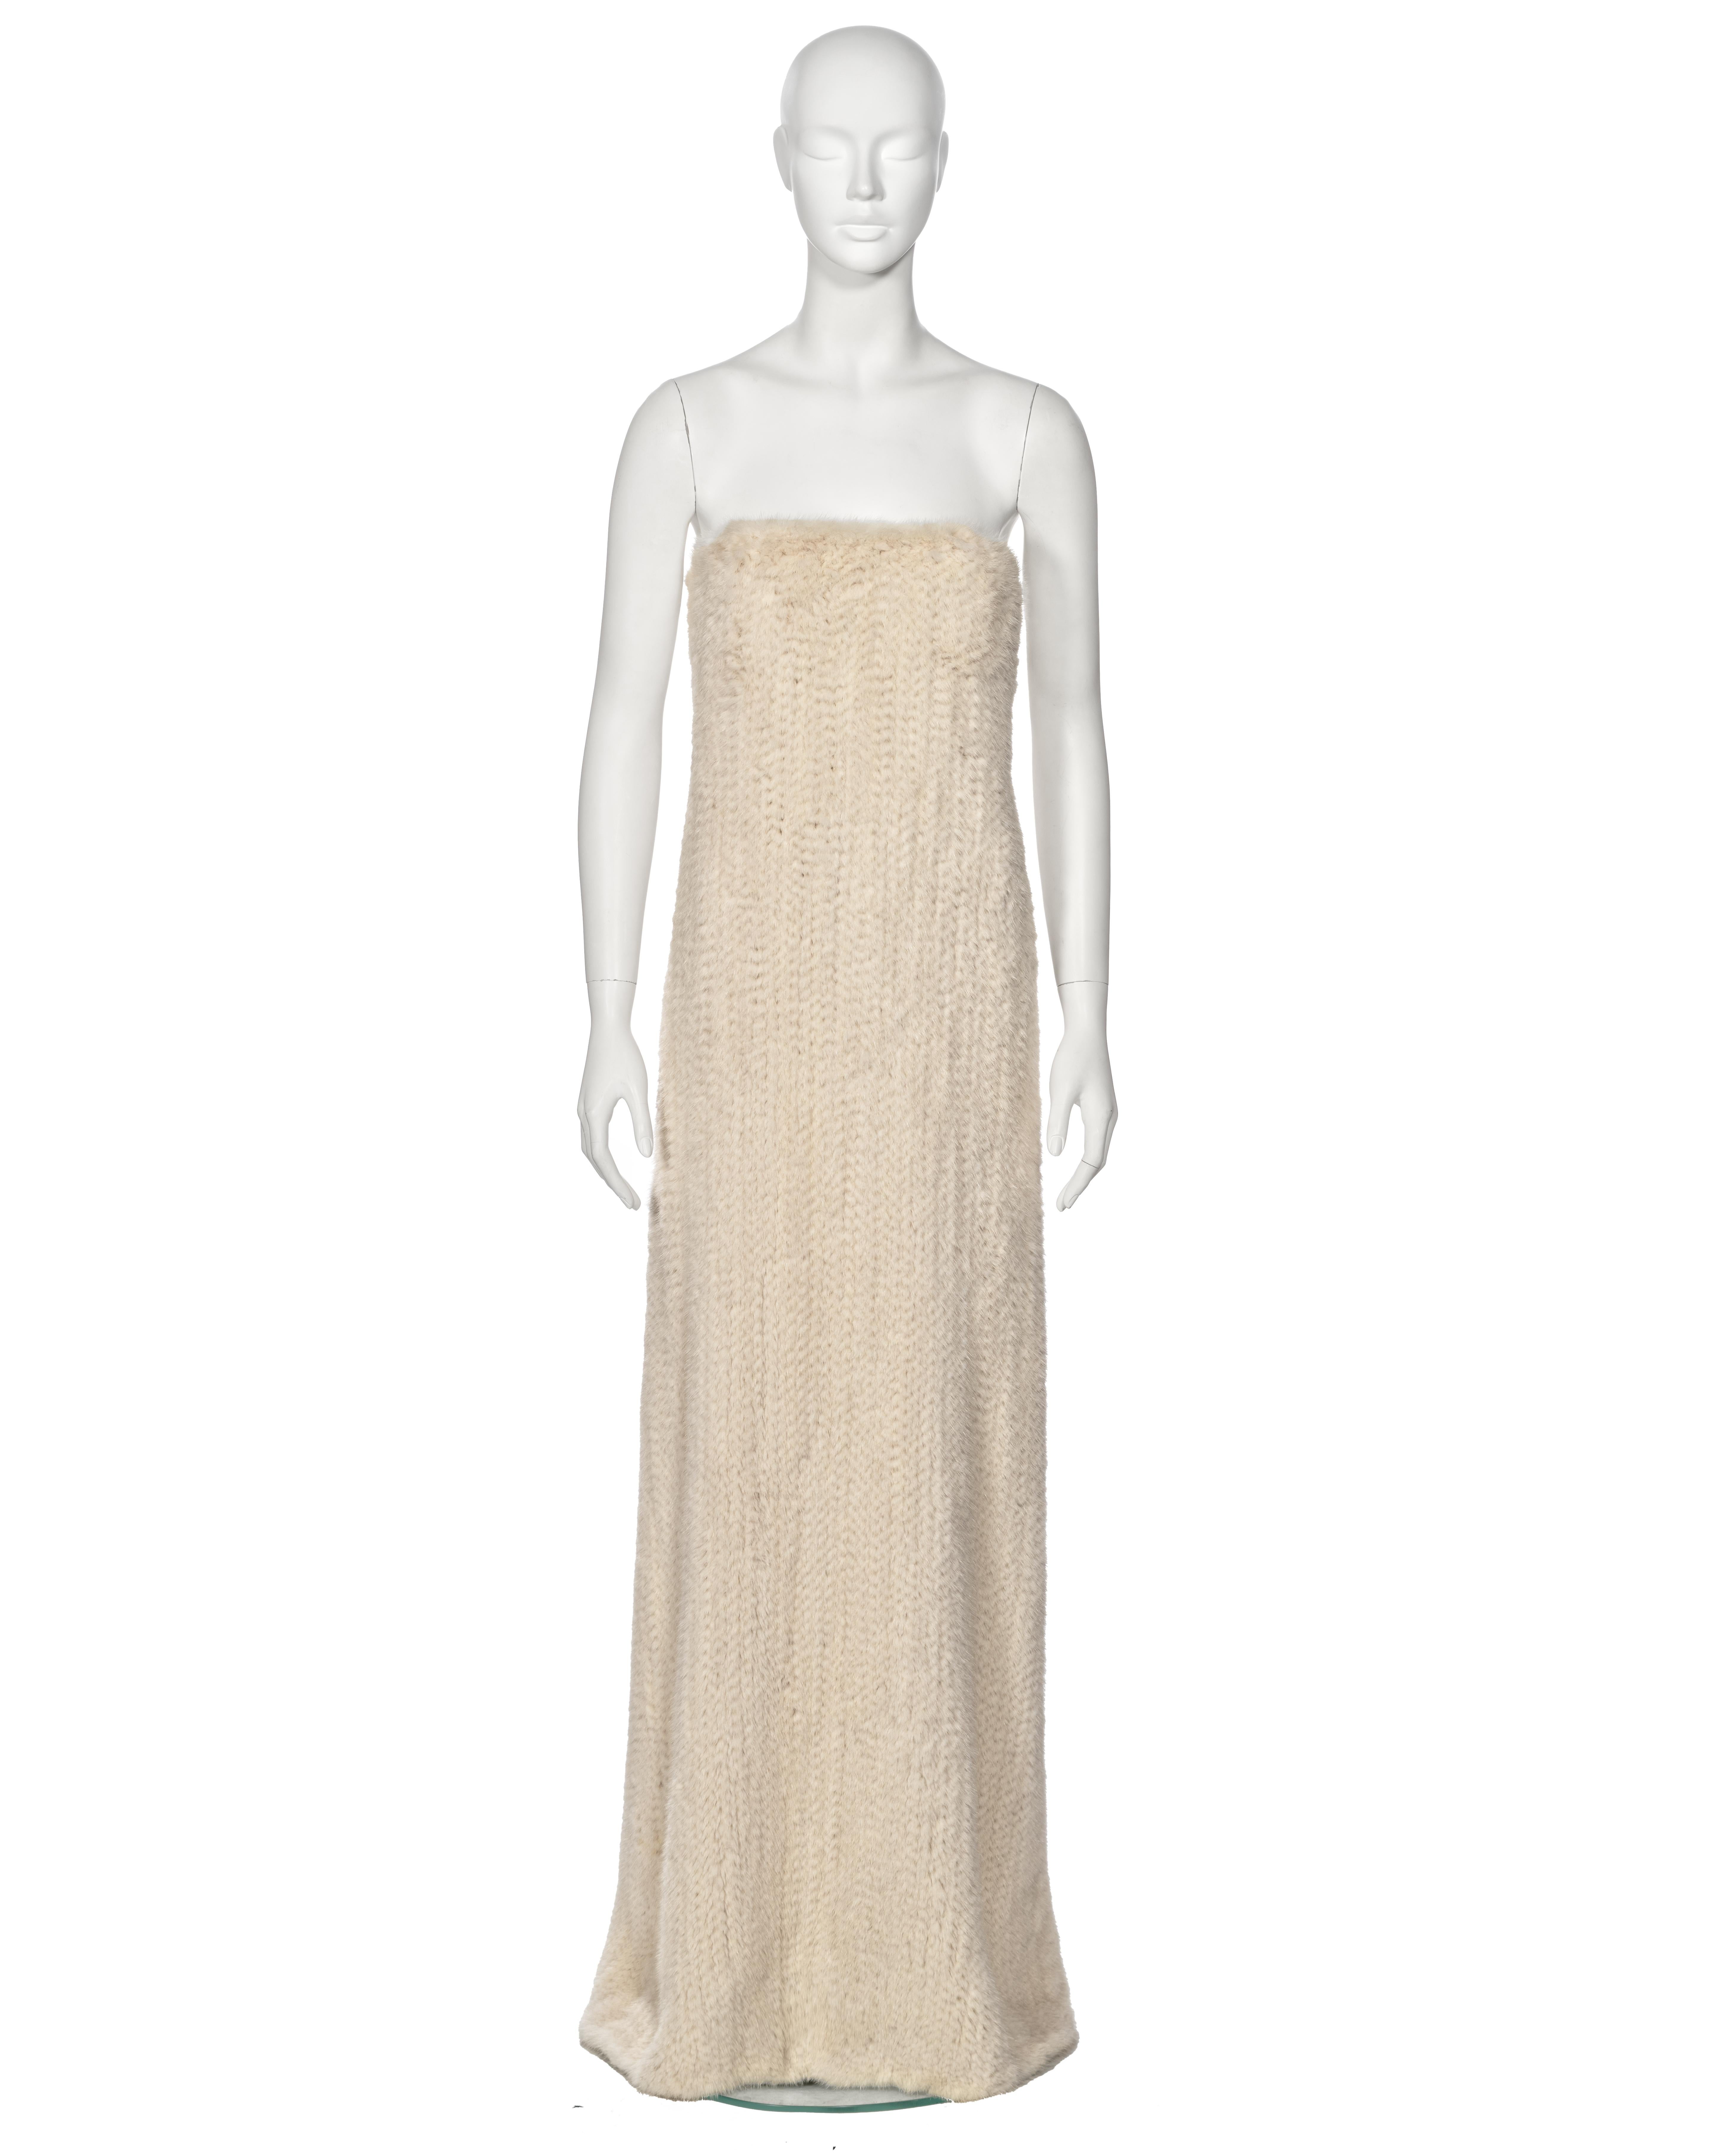 ▪ Mila Schön White Mink Fur Dress
▪ Fall-Winter 1999 Collection
▪ Crafted from knitted white mink fur
▪ Strapless bodice featuring built-in support
▪ Elegant floor length
▪ Straight, relaxed silhouette
▪ Side seam zip closure for a seamless finish
▪